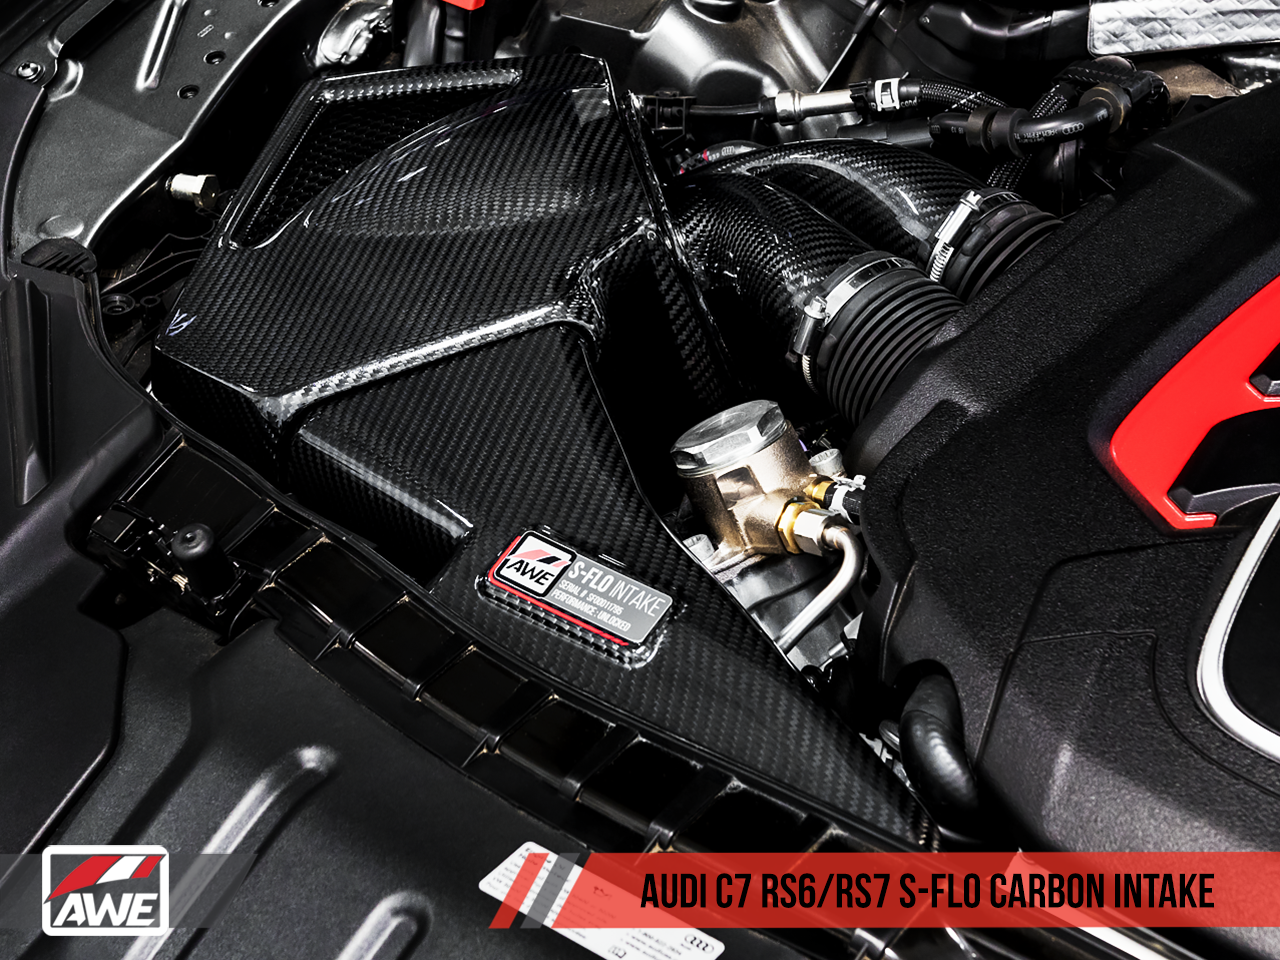 AWE S-FLO Carbon Intake for C7 RS7